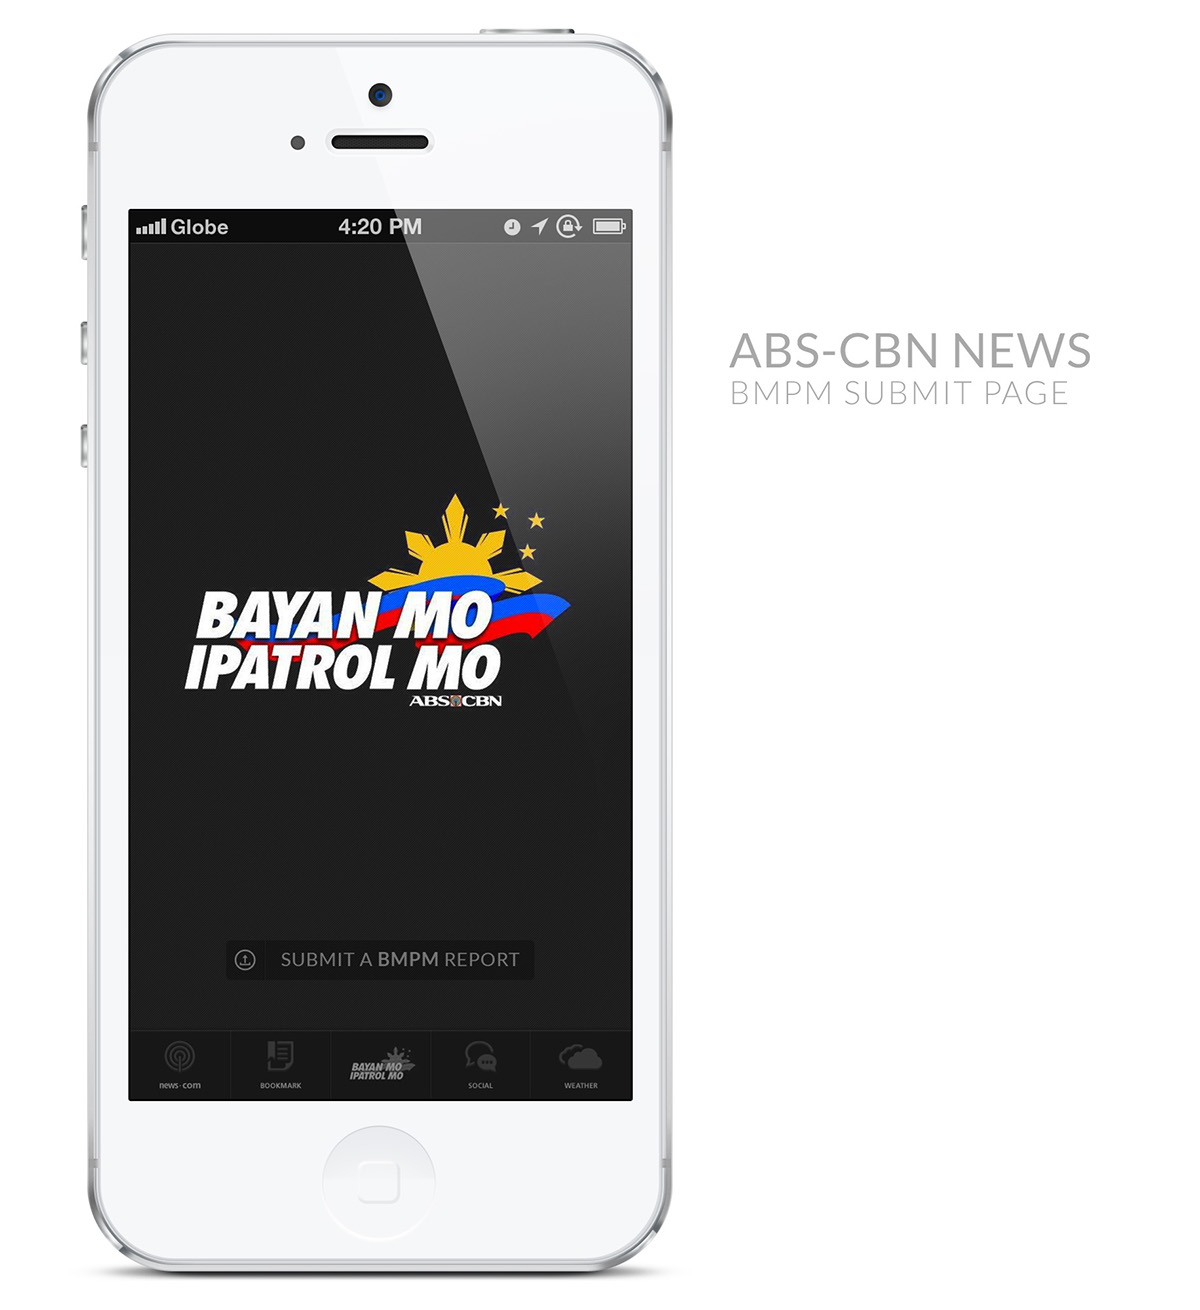 ABS-CBN News news apps redesign ios apple app design iphone philippines